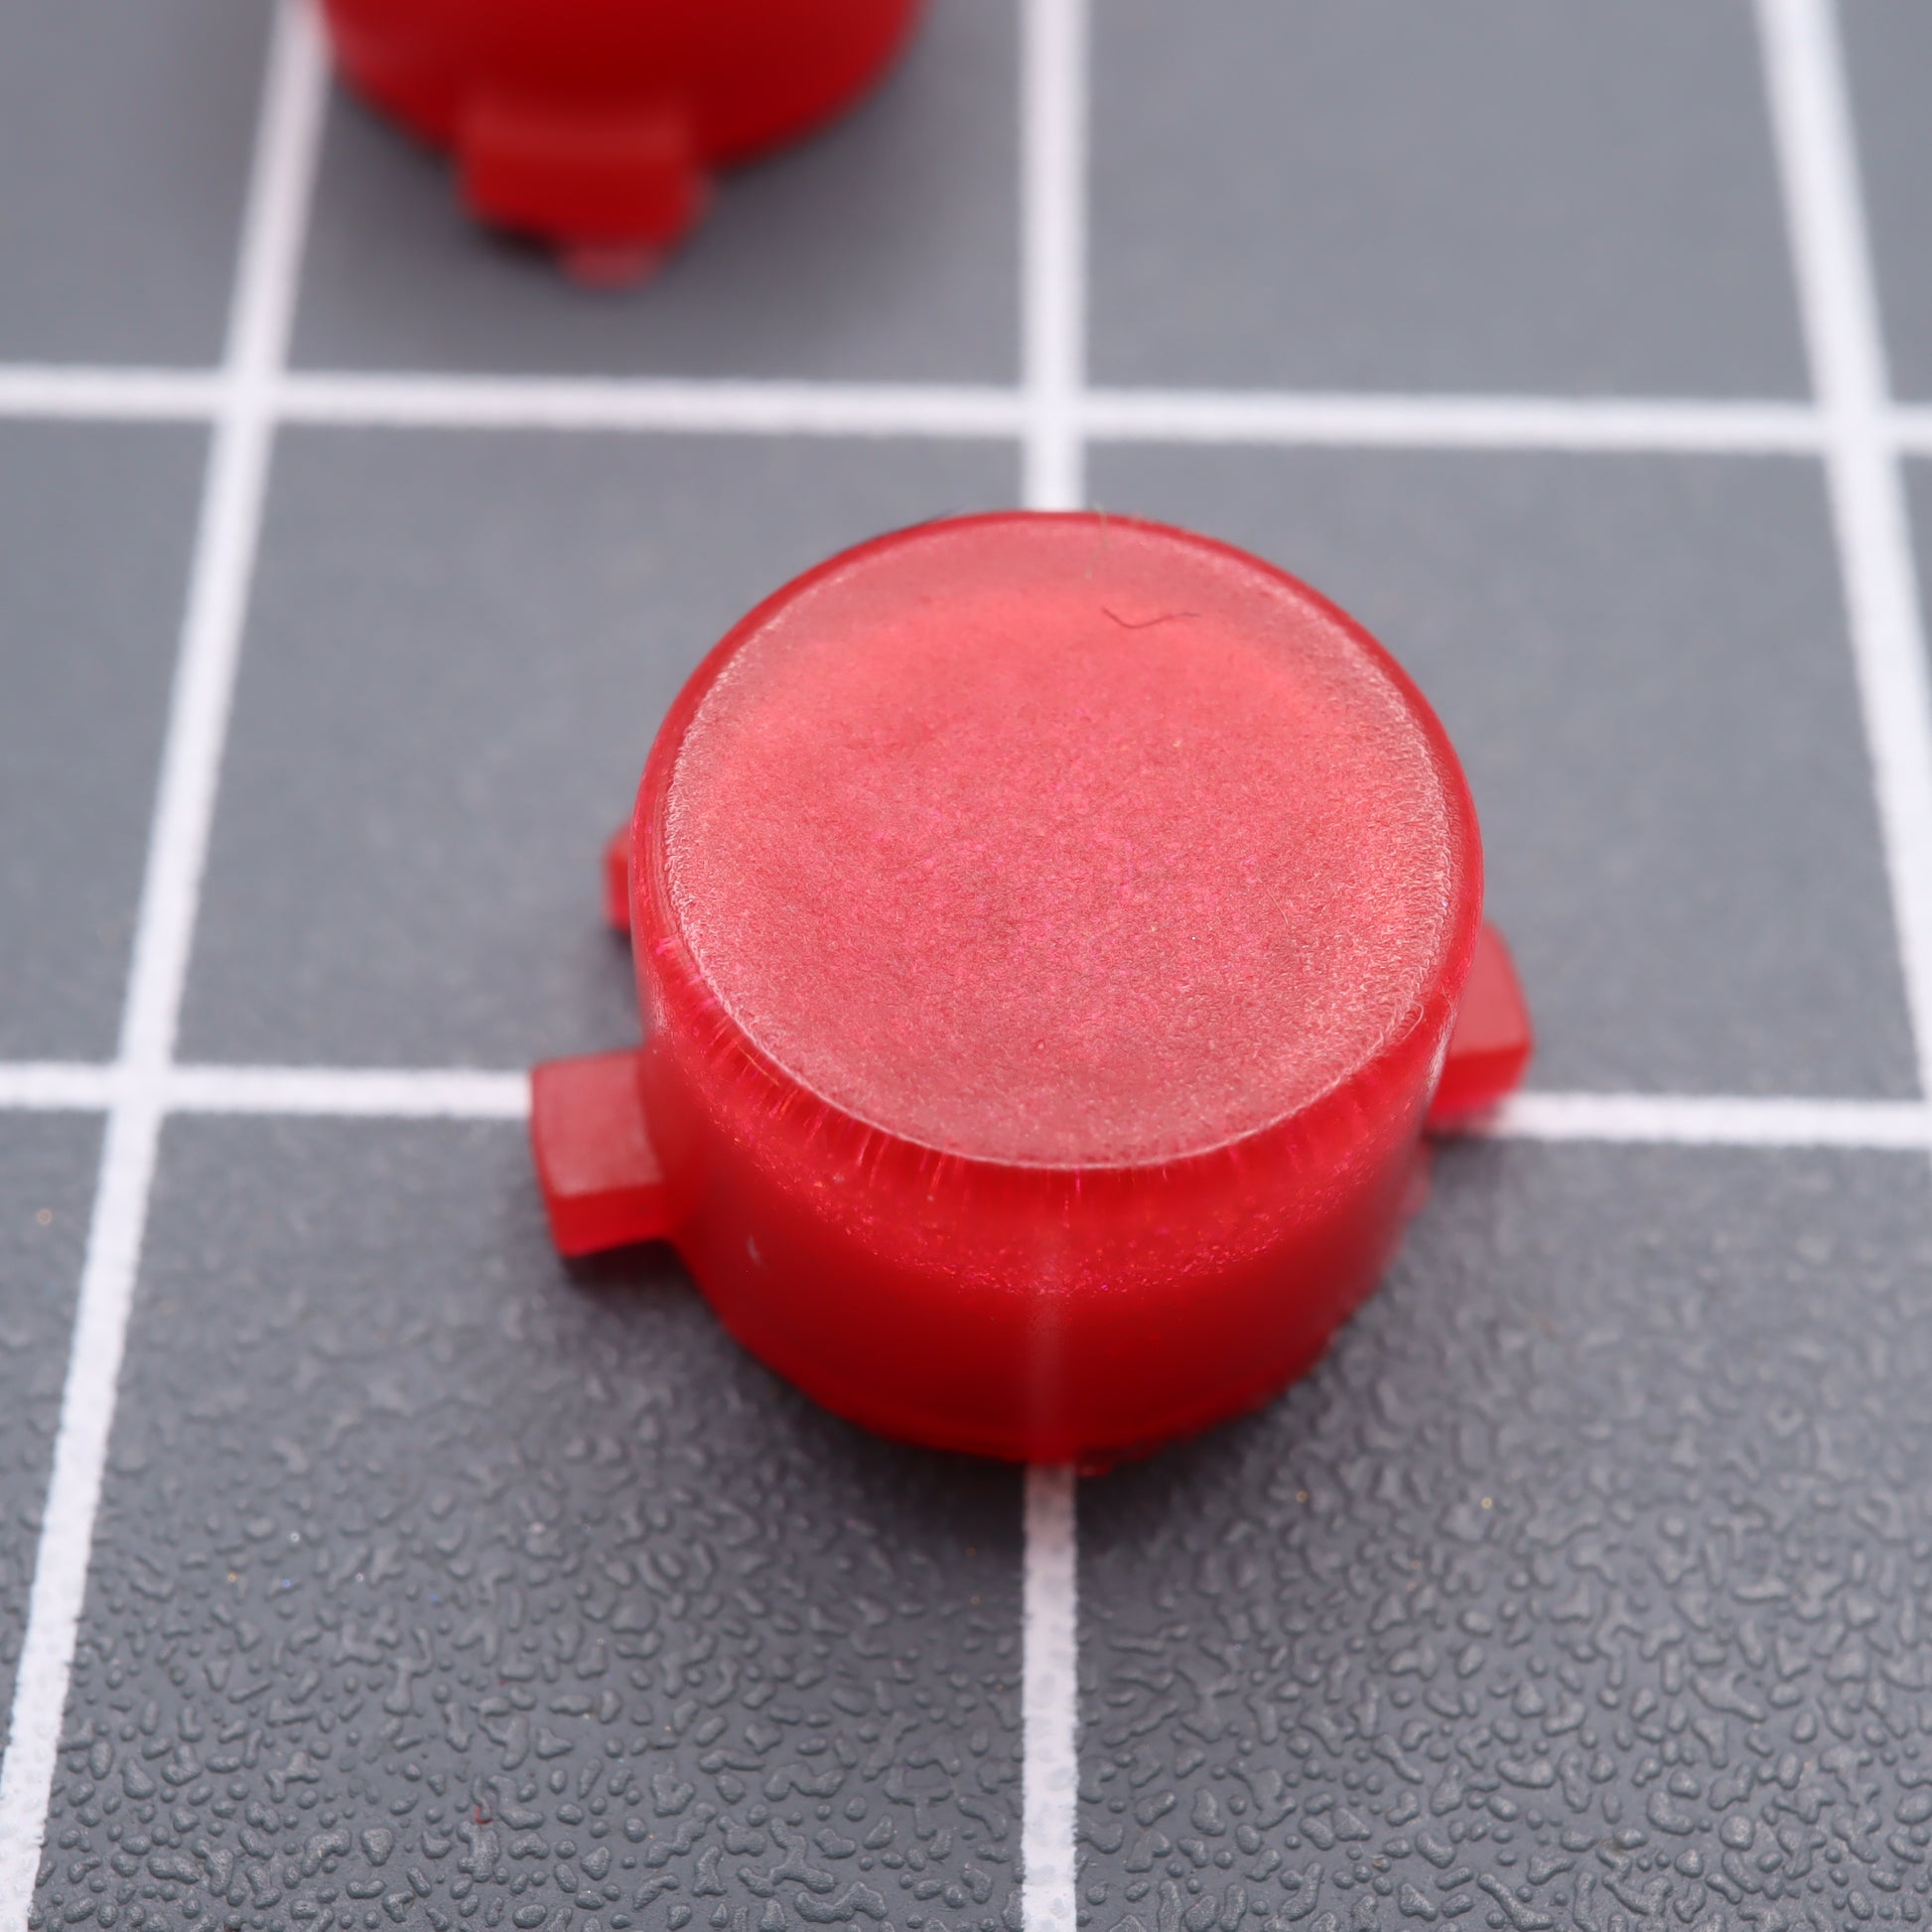 Lab Fifteen co custom resin Strawberry Candy action button close up for the Analogue Pocket